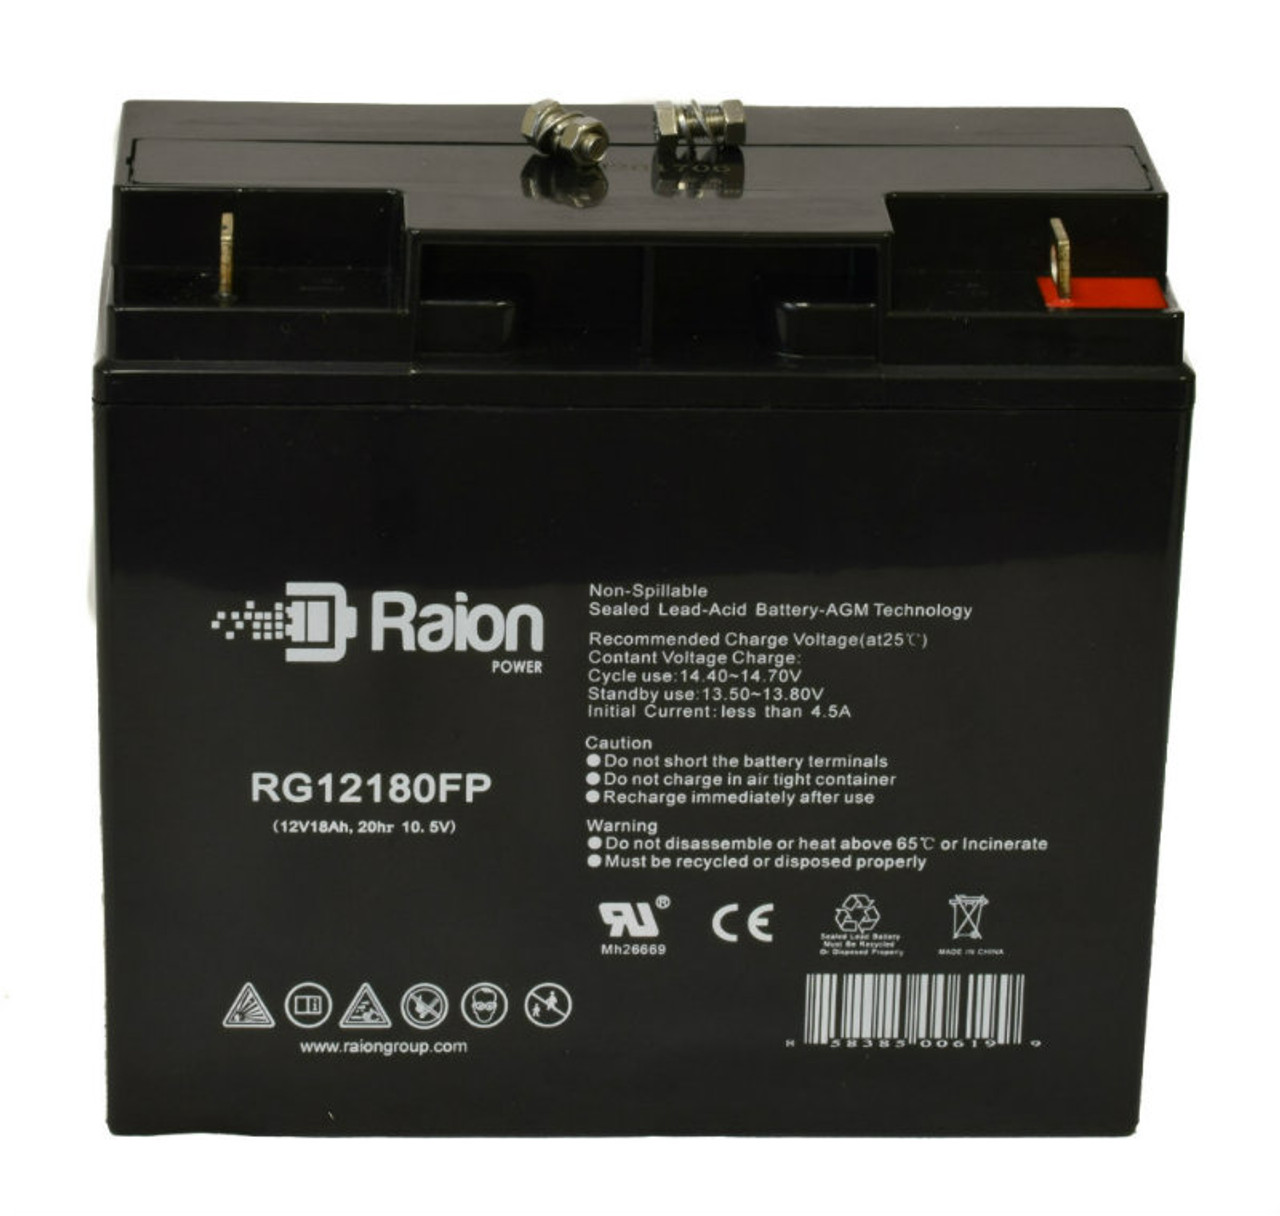 Raion Power RG12180FP 12V 18Ah AGM Battery for Chicago Electric 08884 3-in-1 Jump Starter